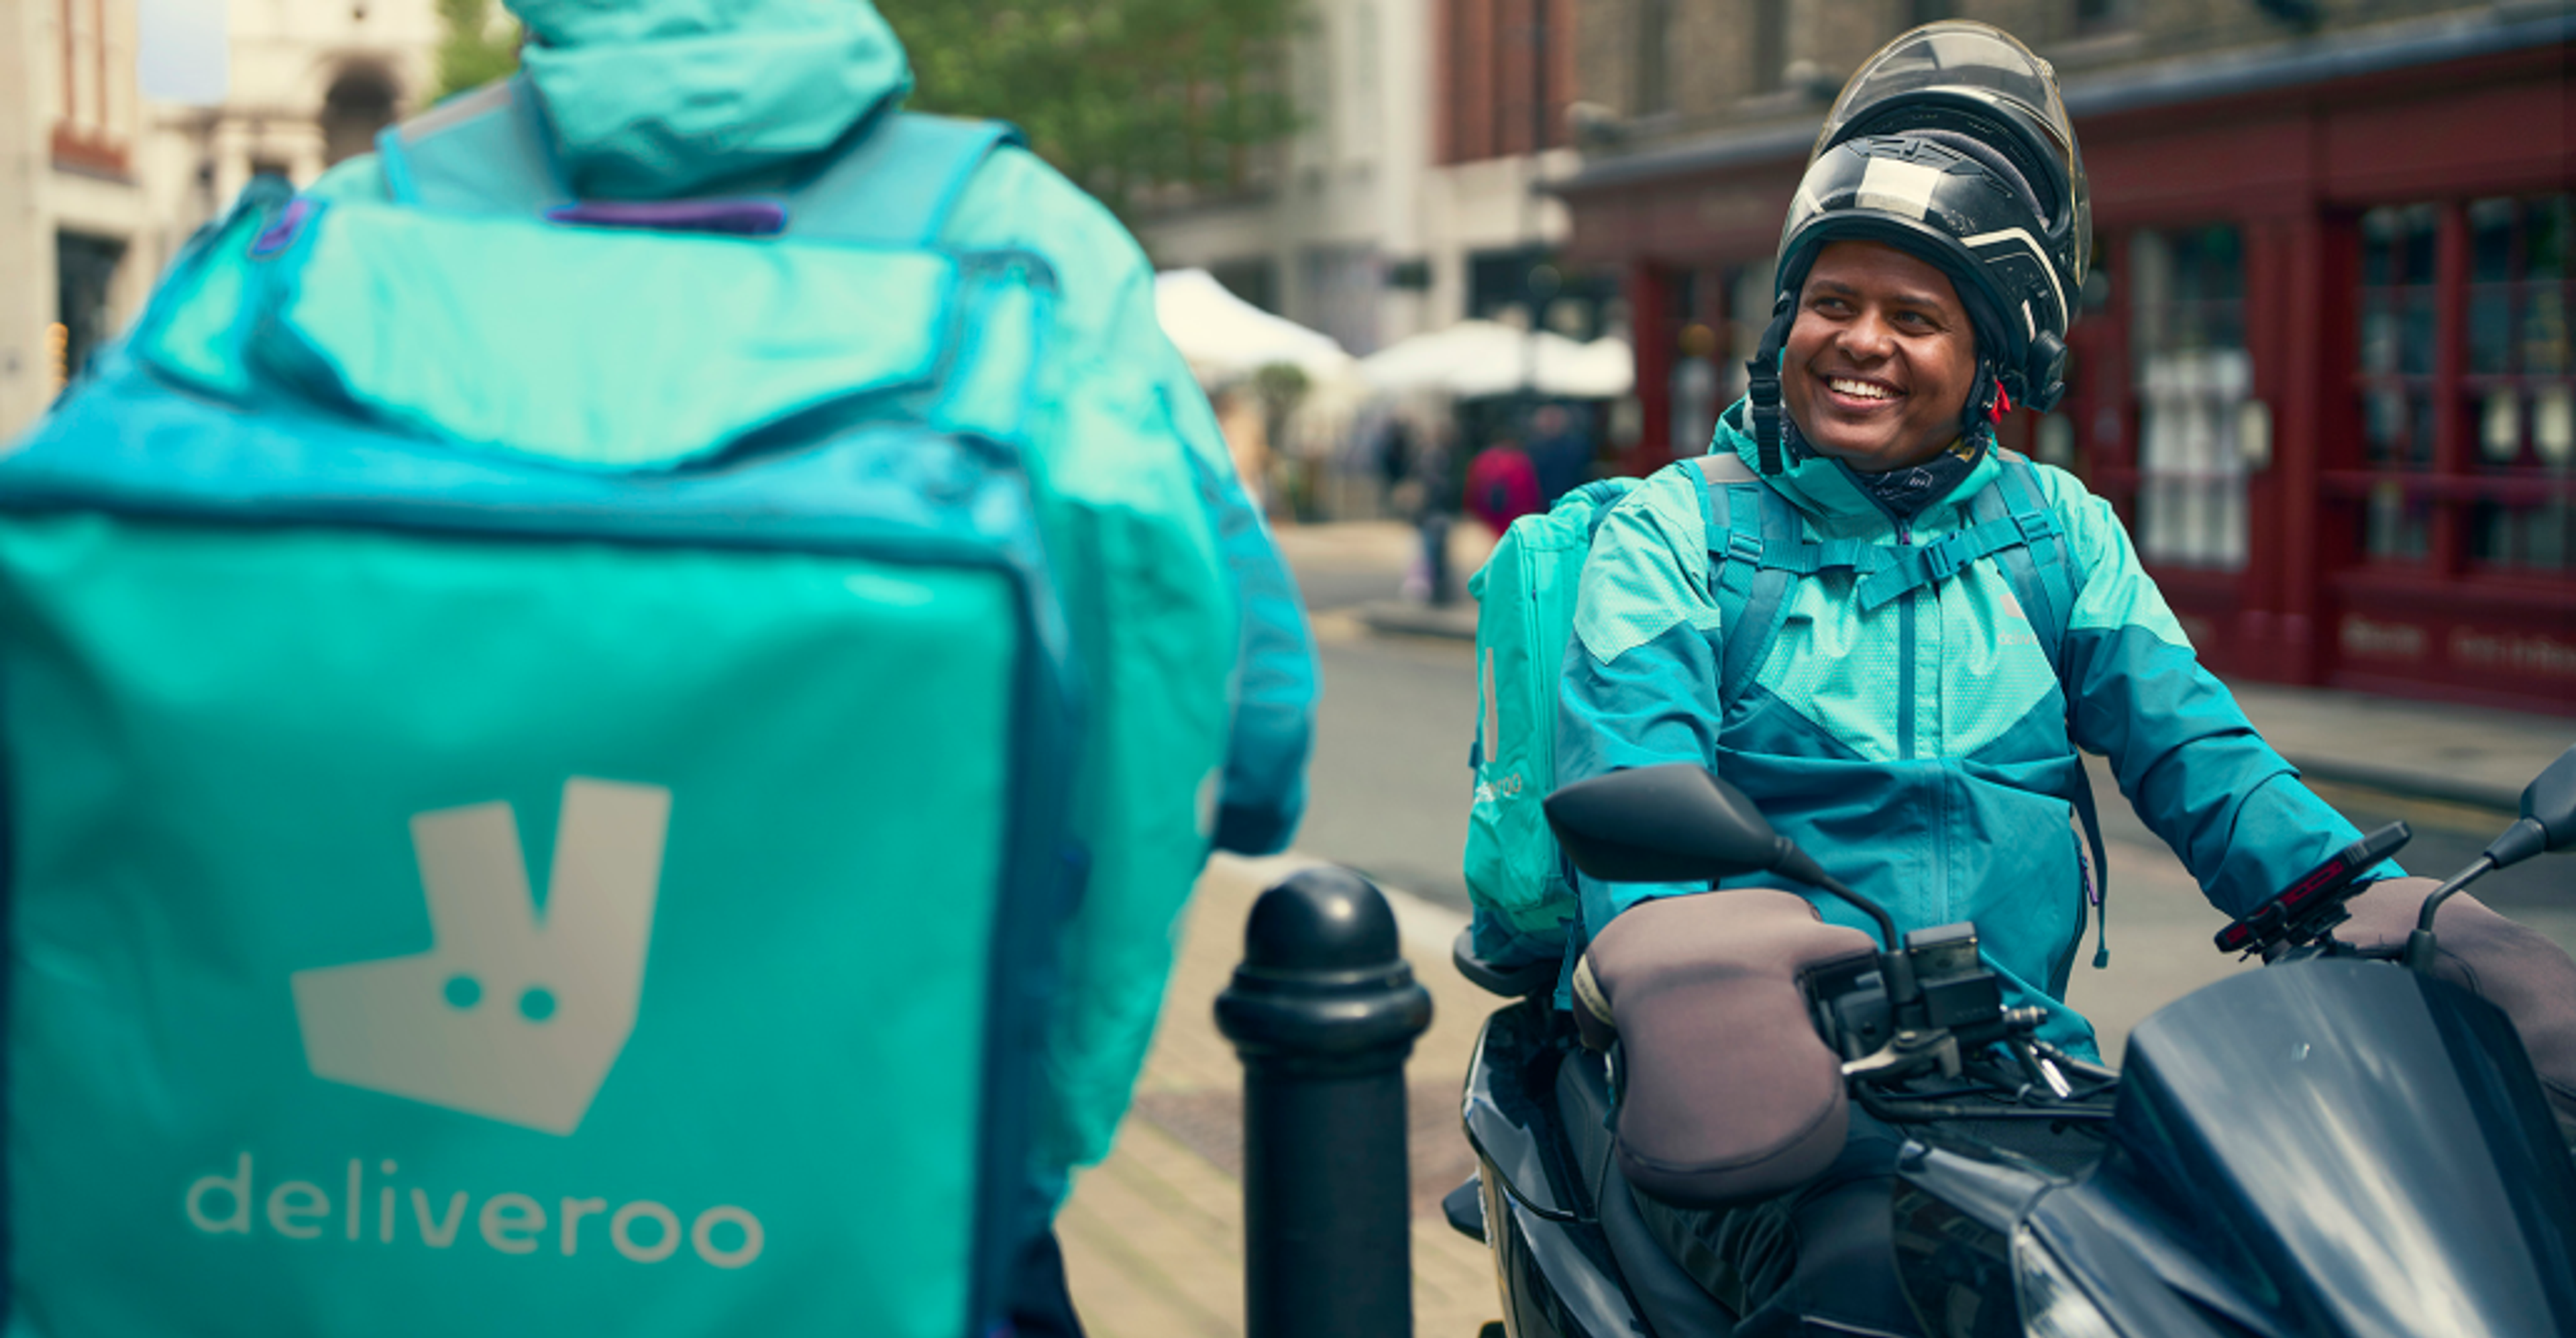 Zego Deliveroo Scooter Delivery Insurance Drivers